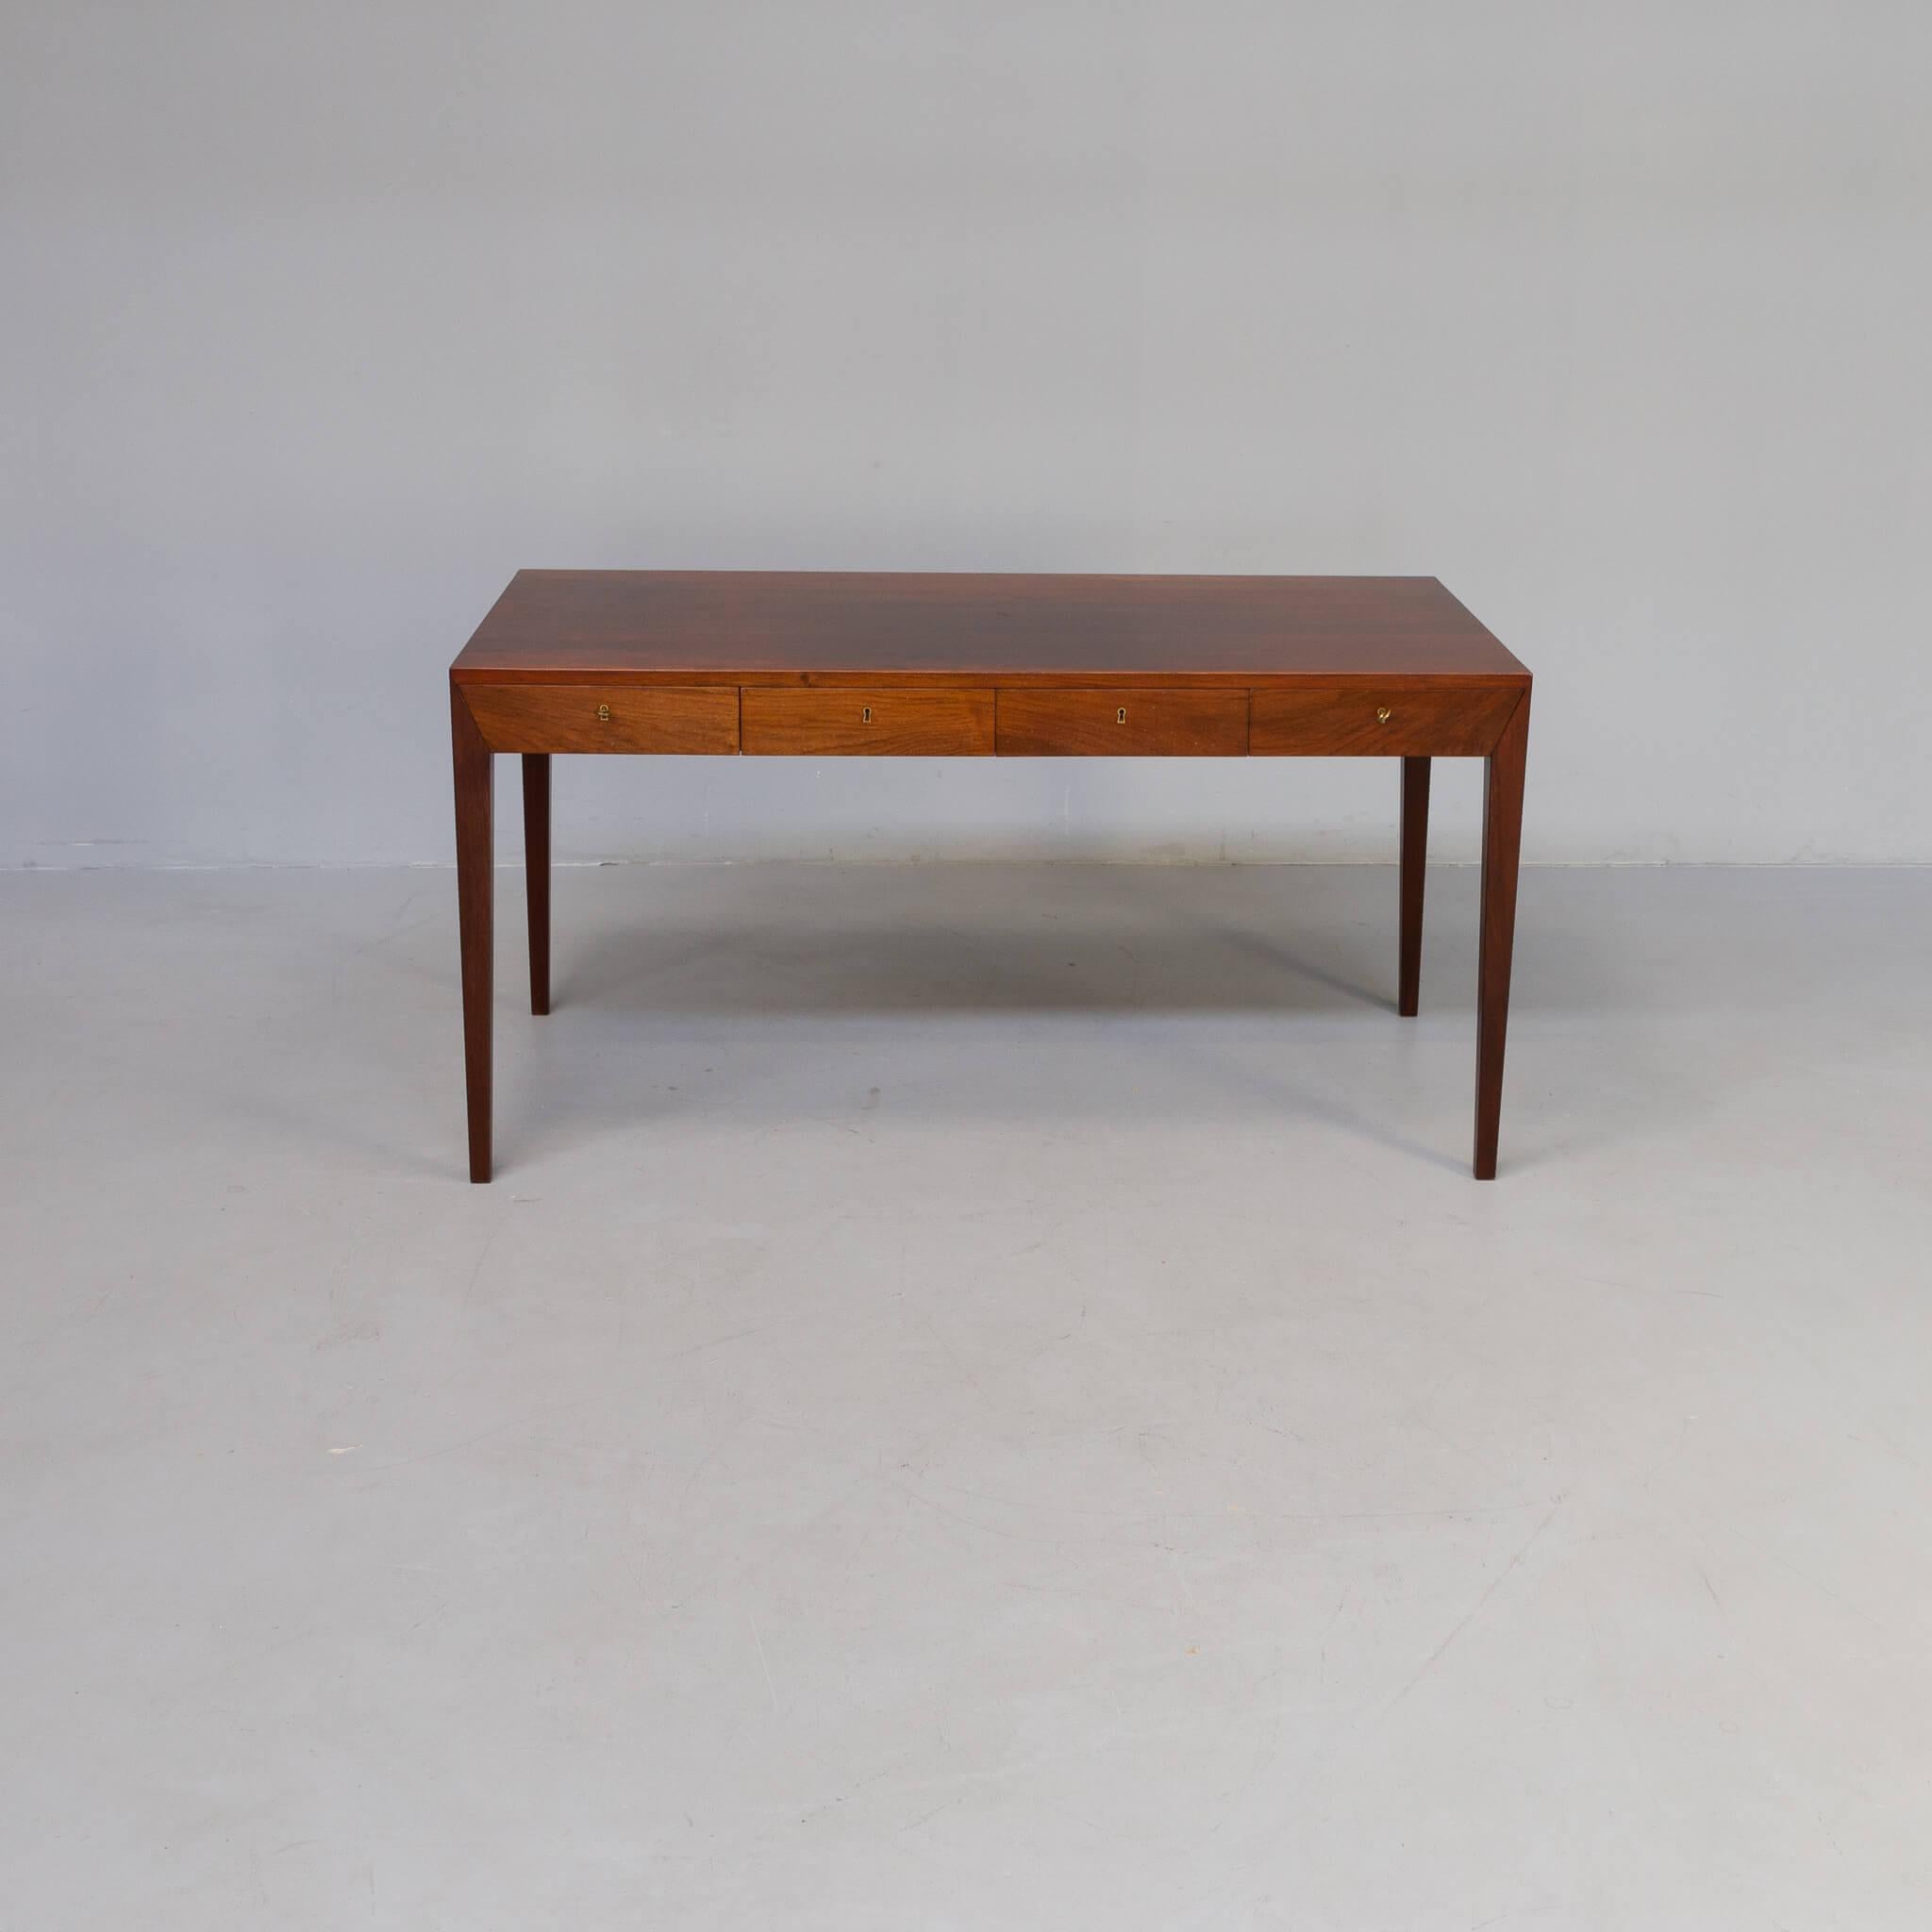 Simplicity and an angular silhouette make this rosewood desk a striking mid-century collectible. It has four elegant drawers and four long tapered legs. Produced by the renowned Danish manufacturer Haslev, this model is one of Severin Hansen’s most